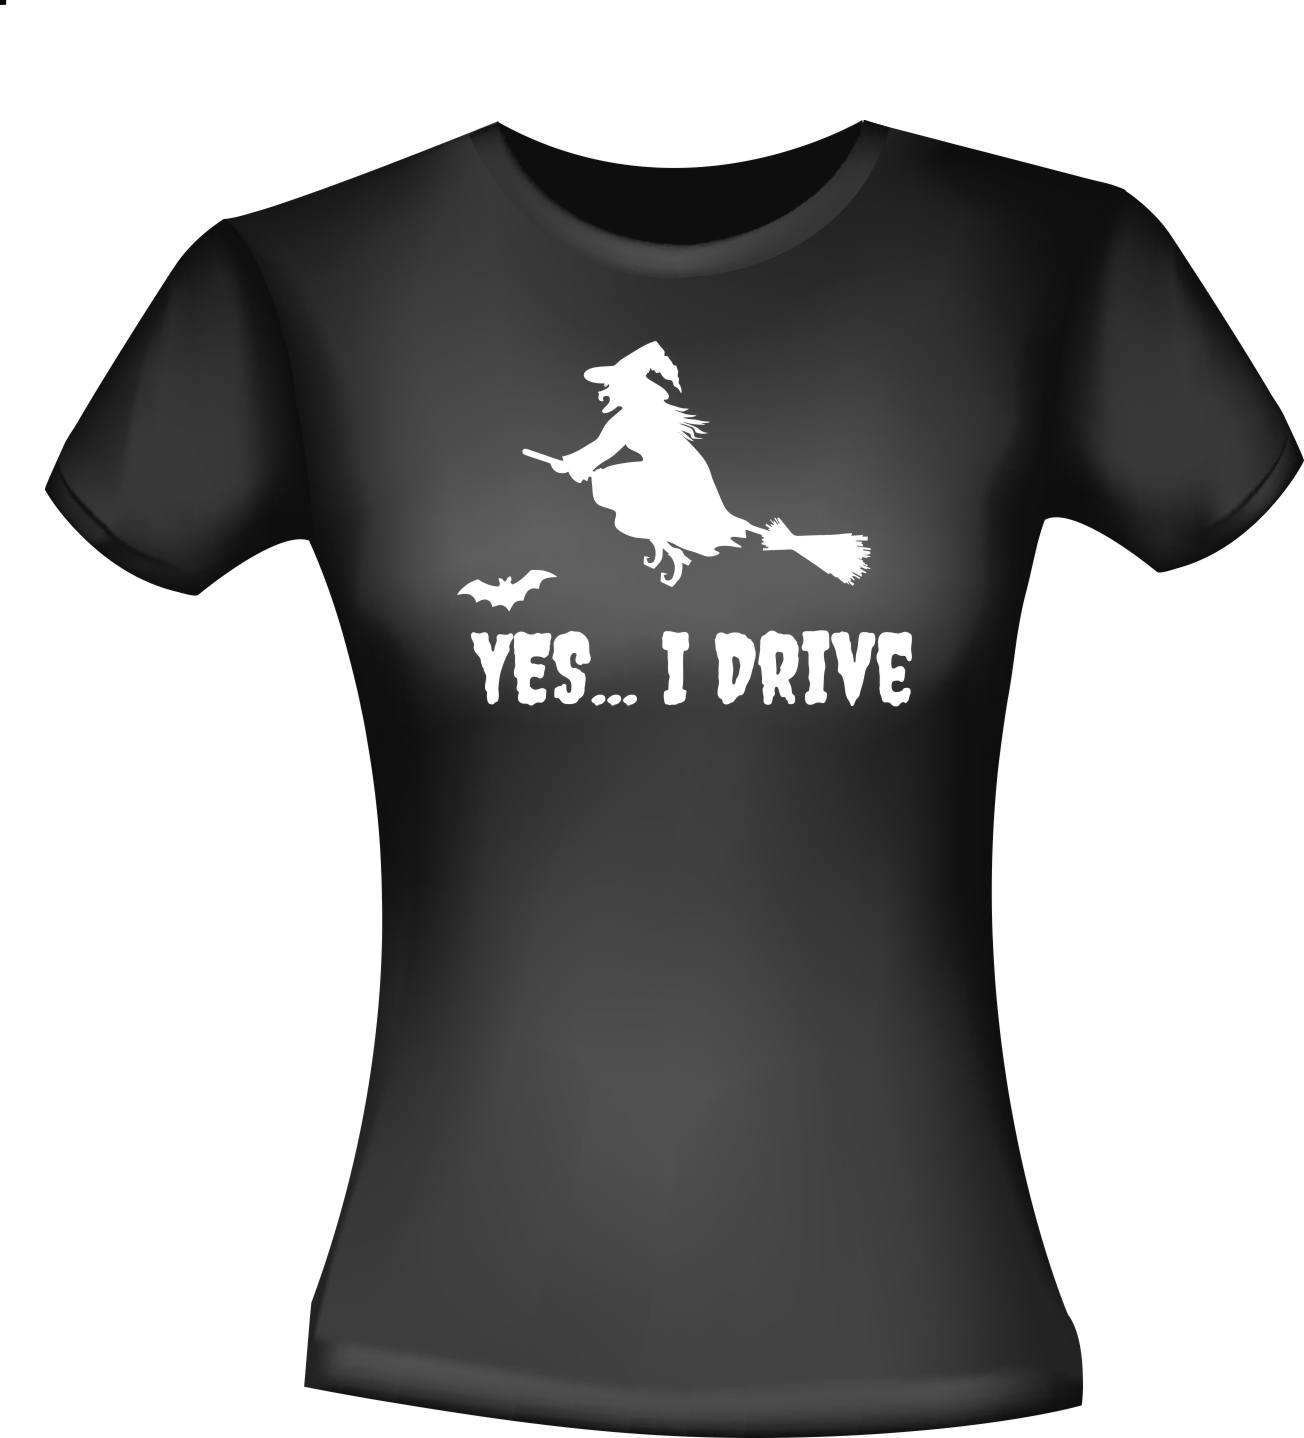 T-shirt witch i drive.